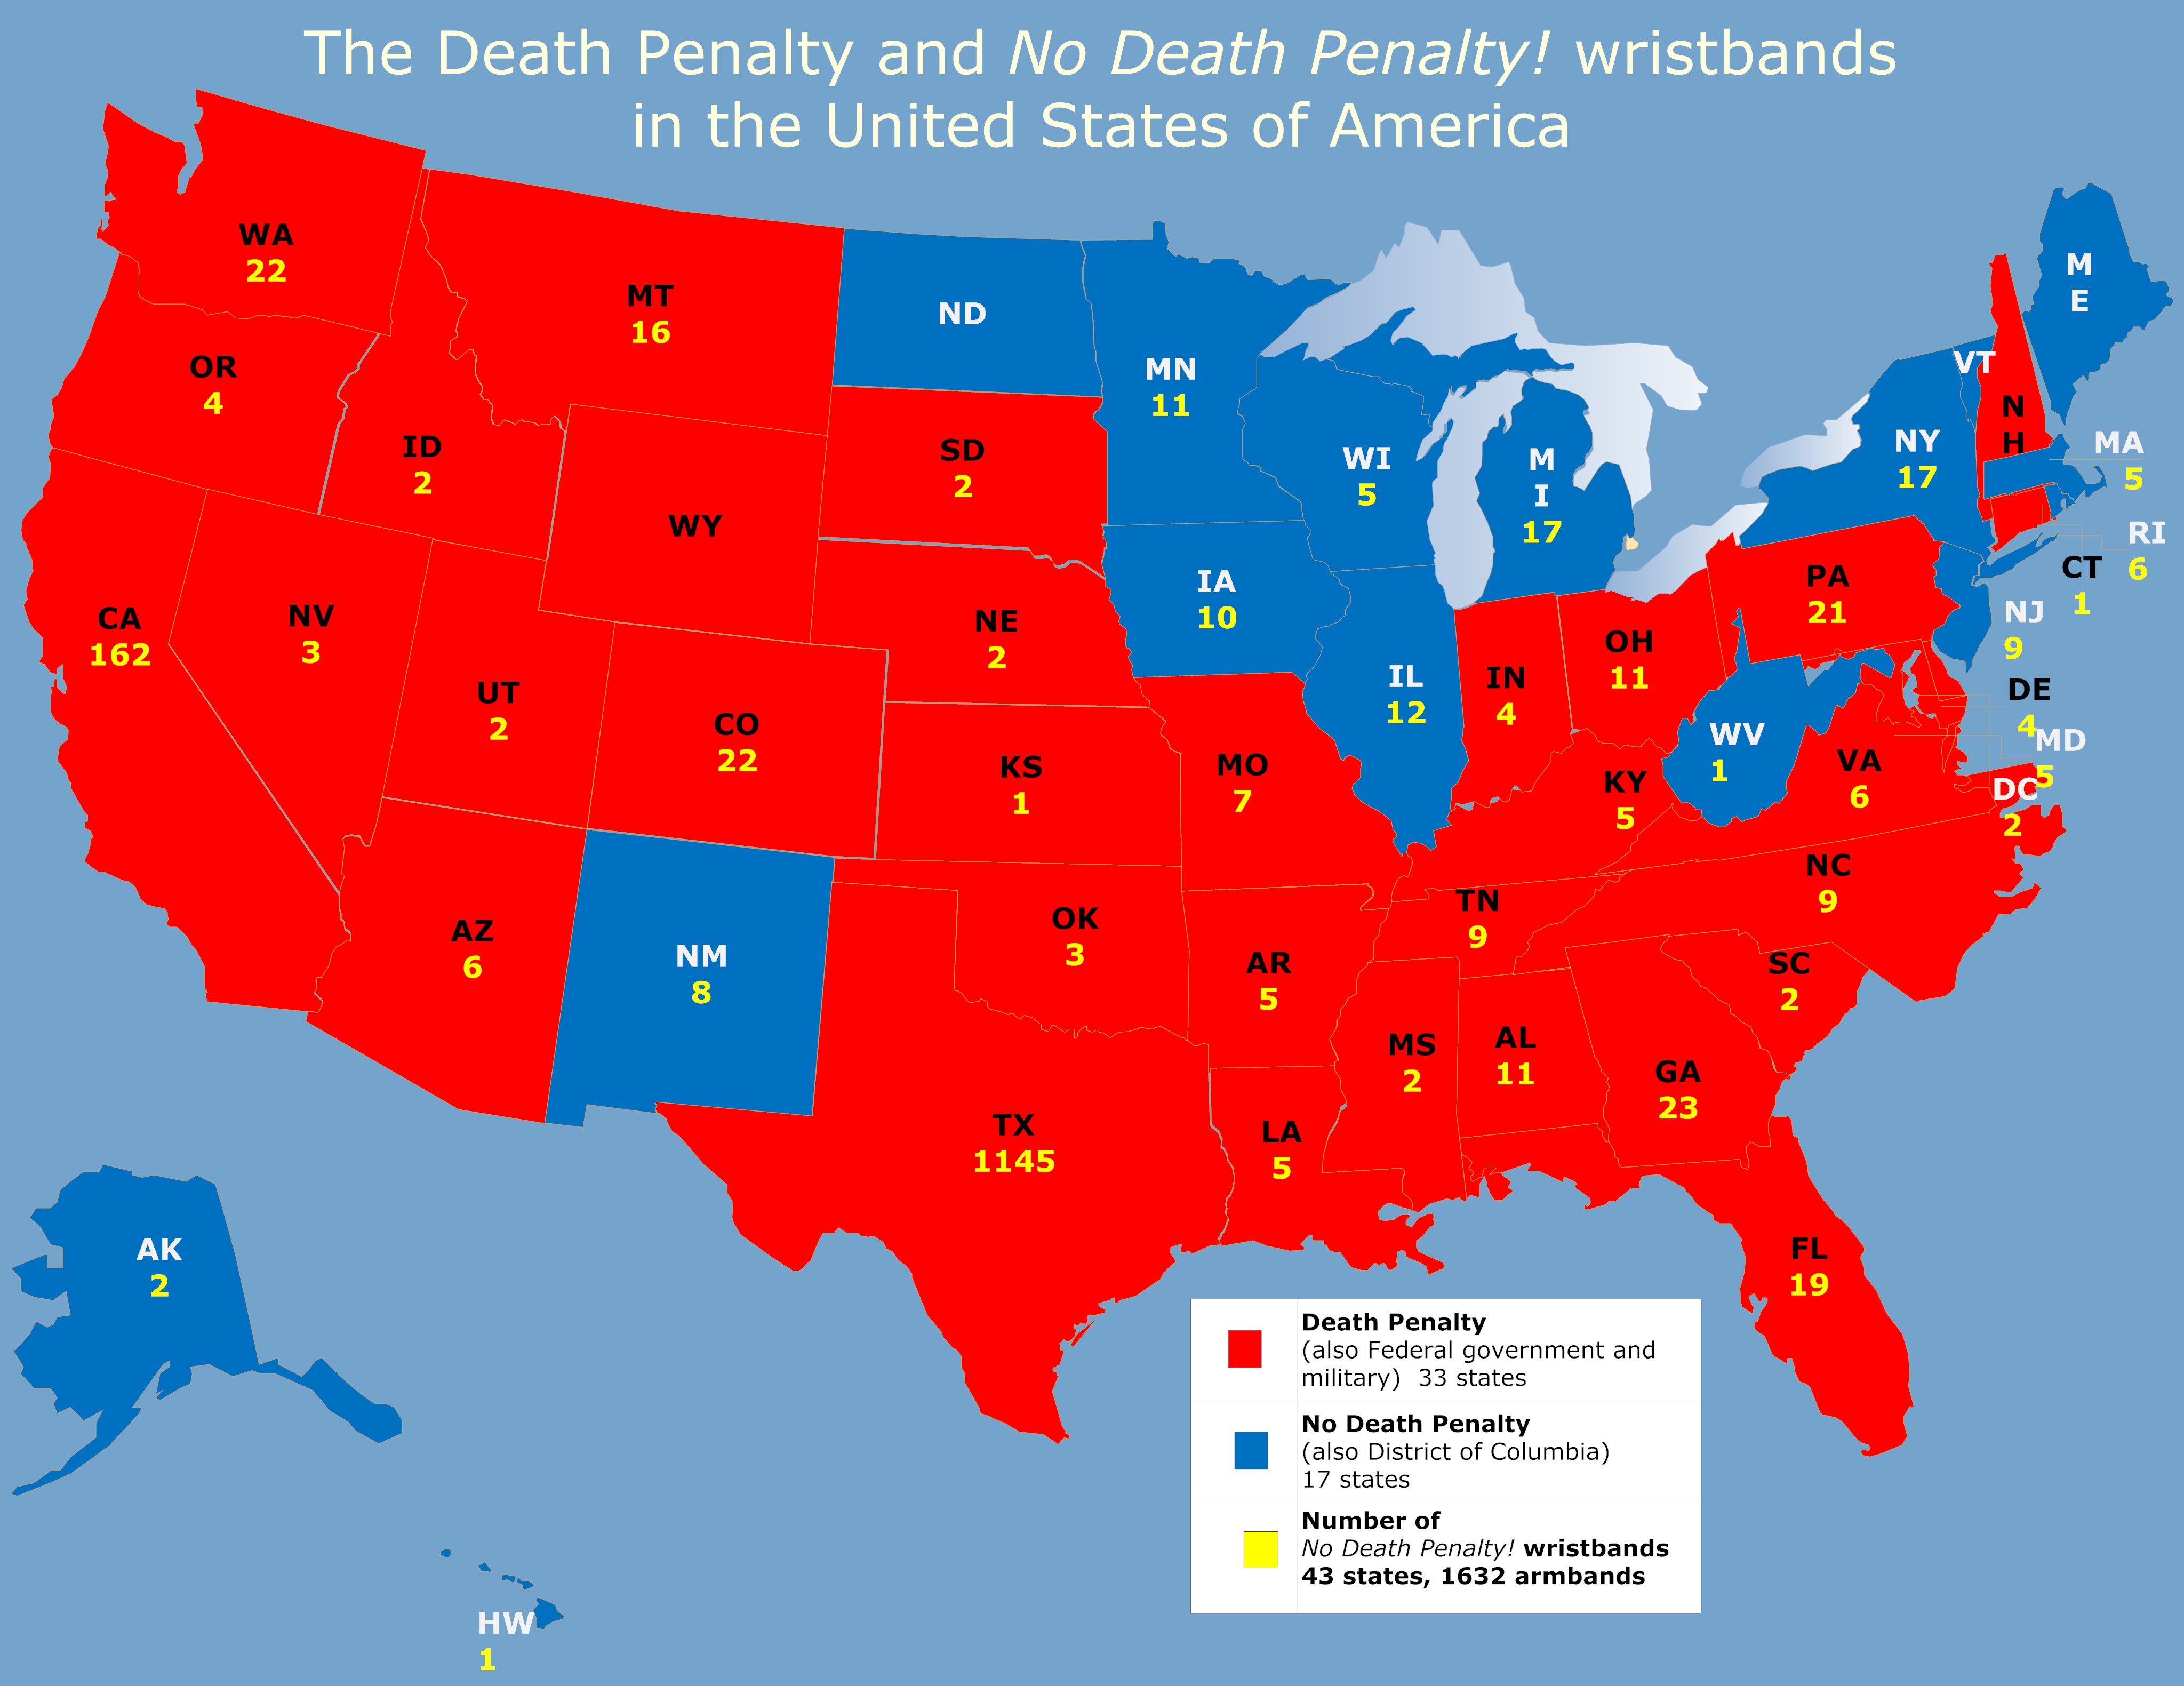 death-penalty-and-wristbands-by-state2.jpg